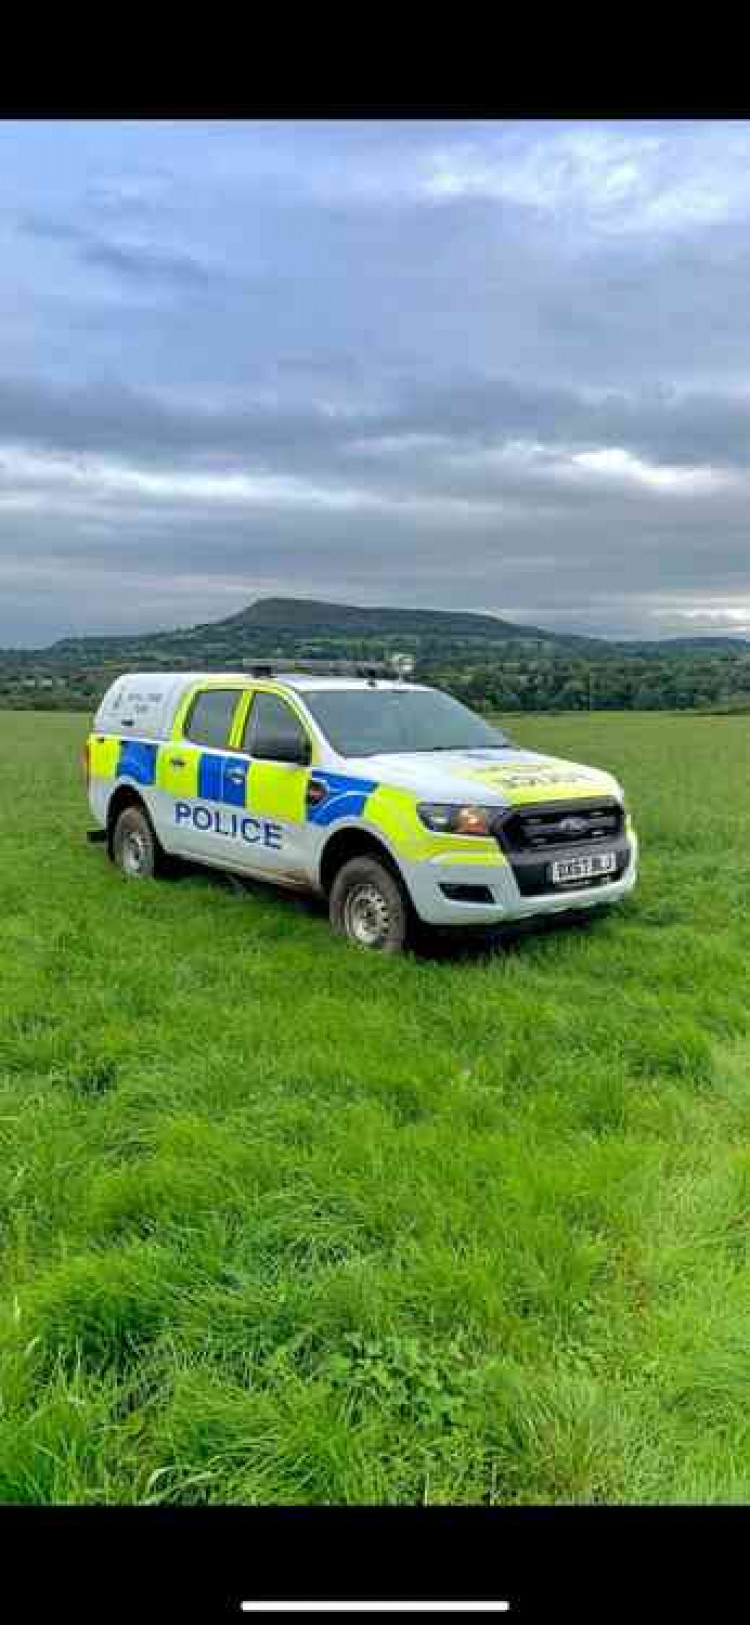 (Image by Cheshire Police Rural Crime)